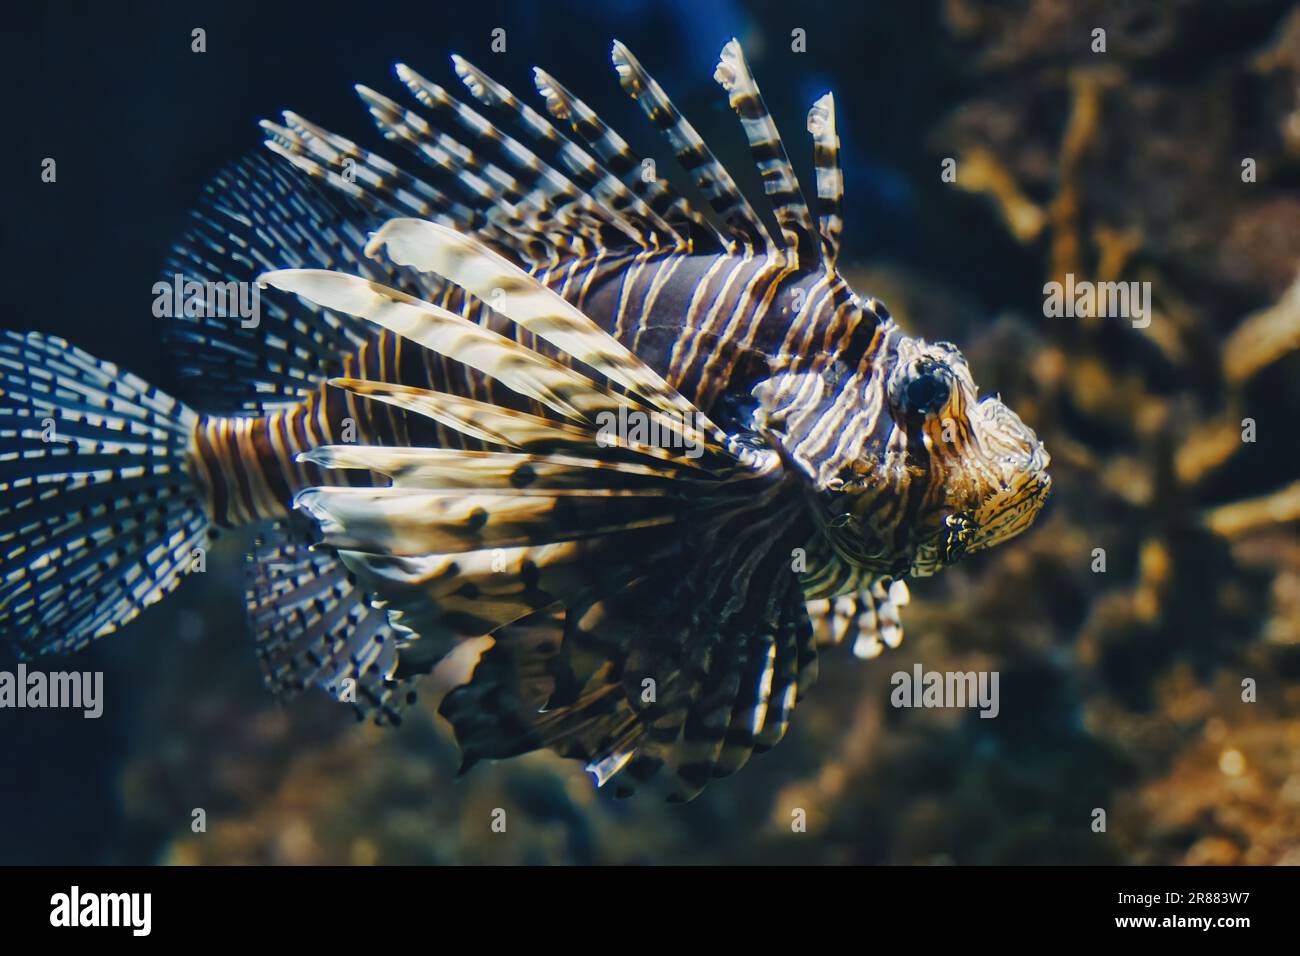 Full-length side profile view of a lionfish swimming in the water in a fish tank at an aquarium Stock Photo